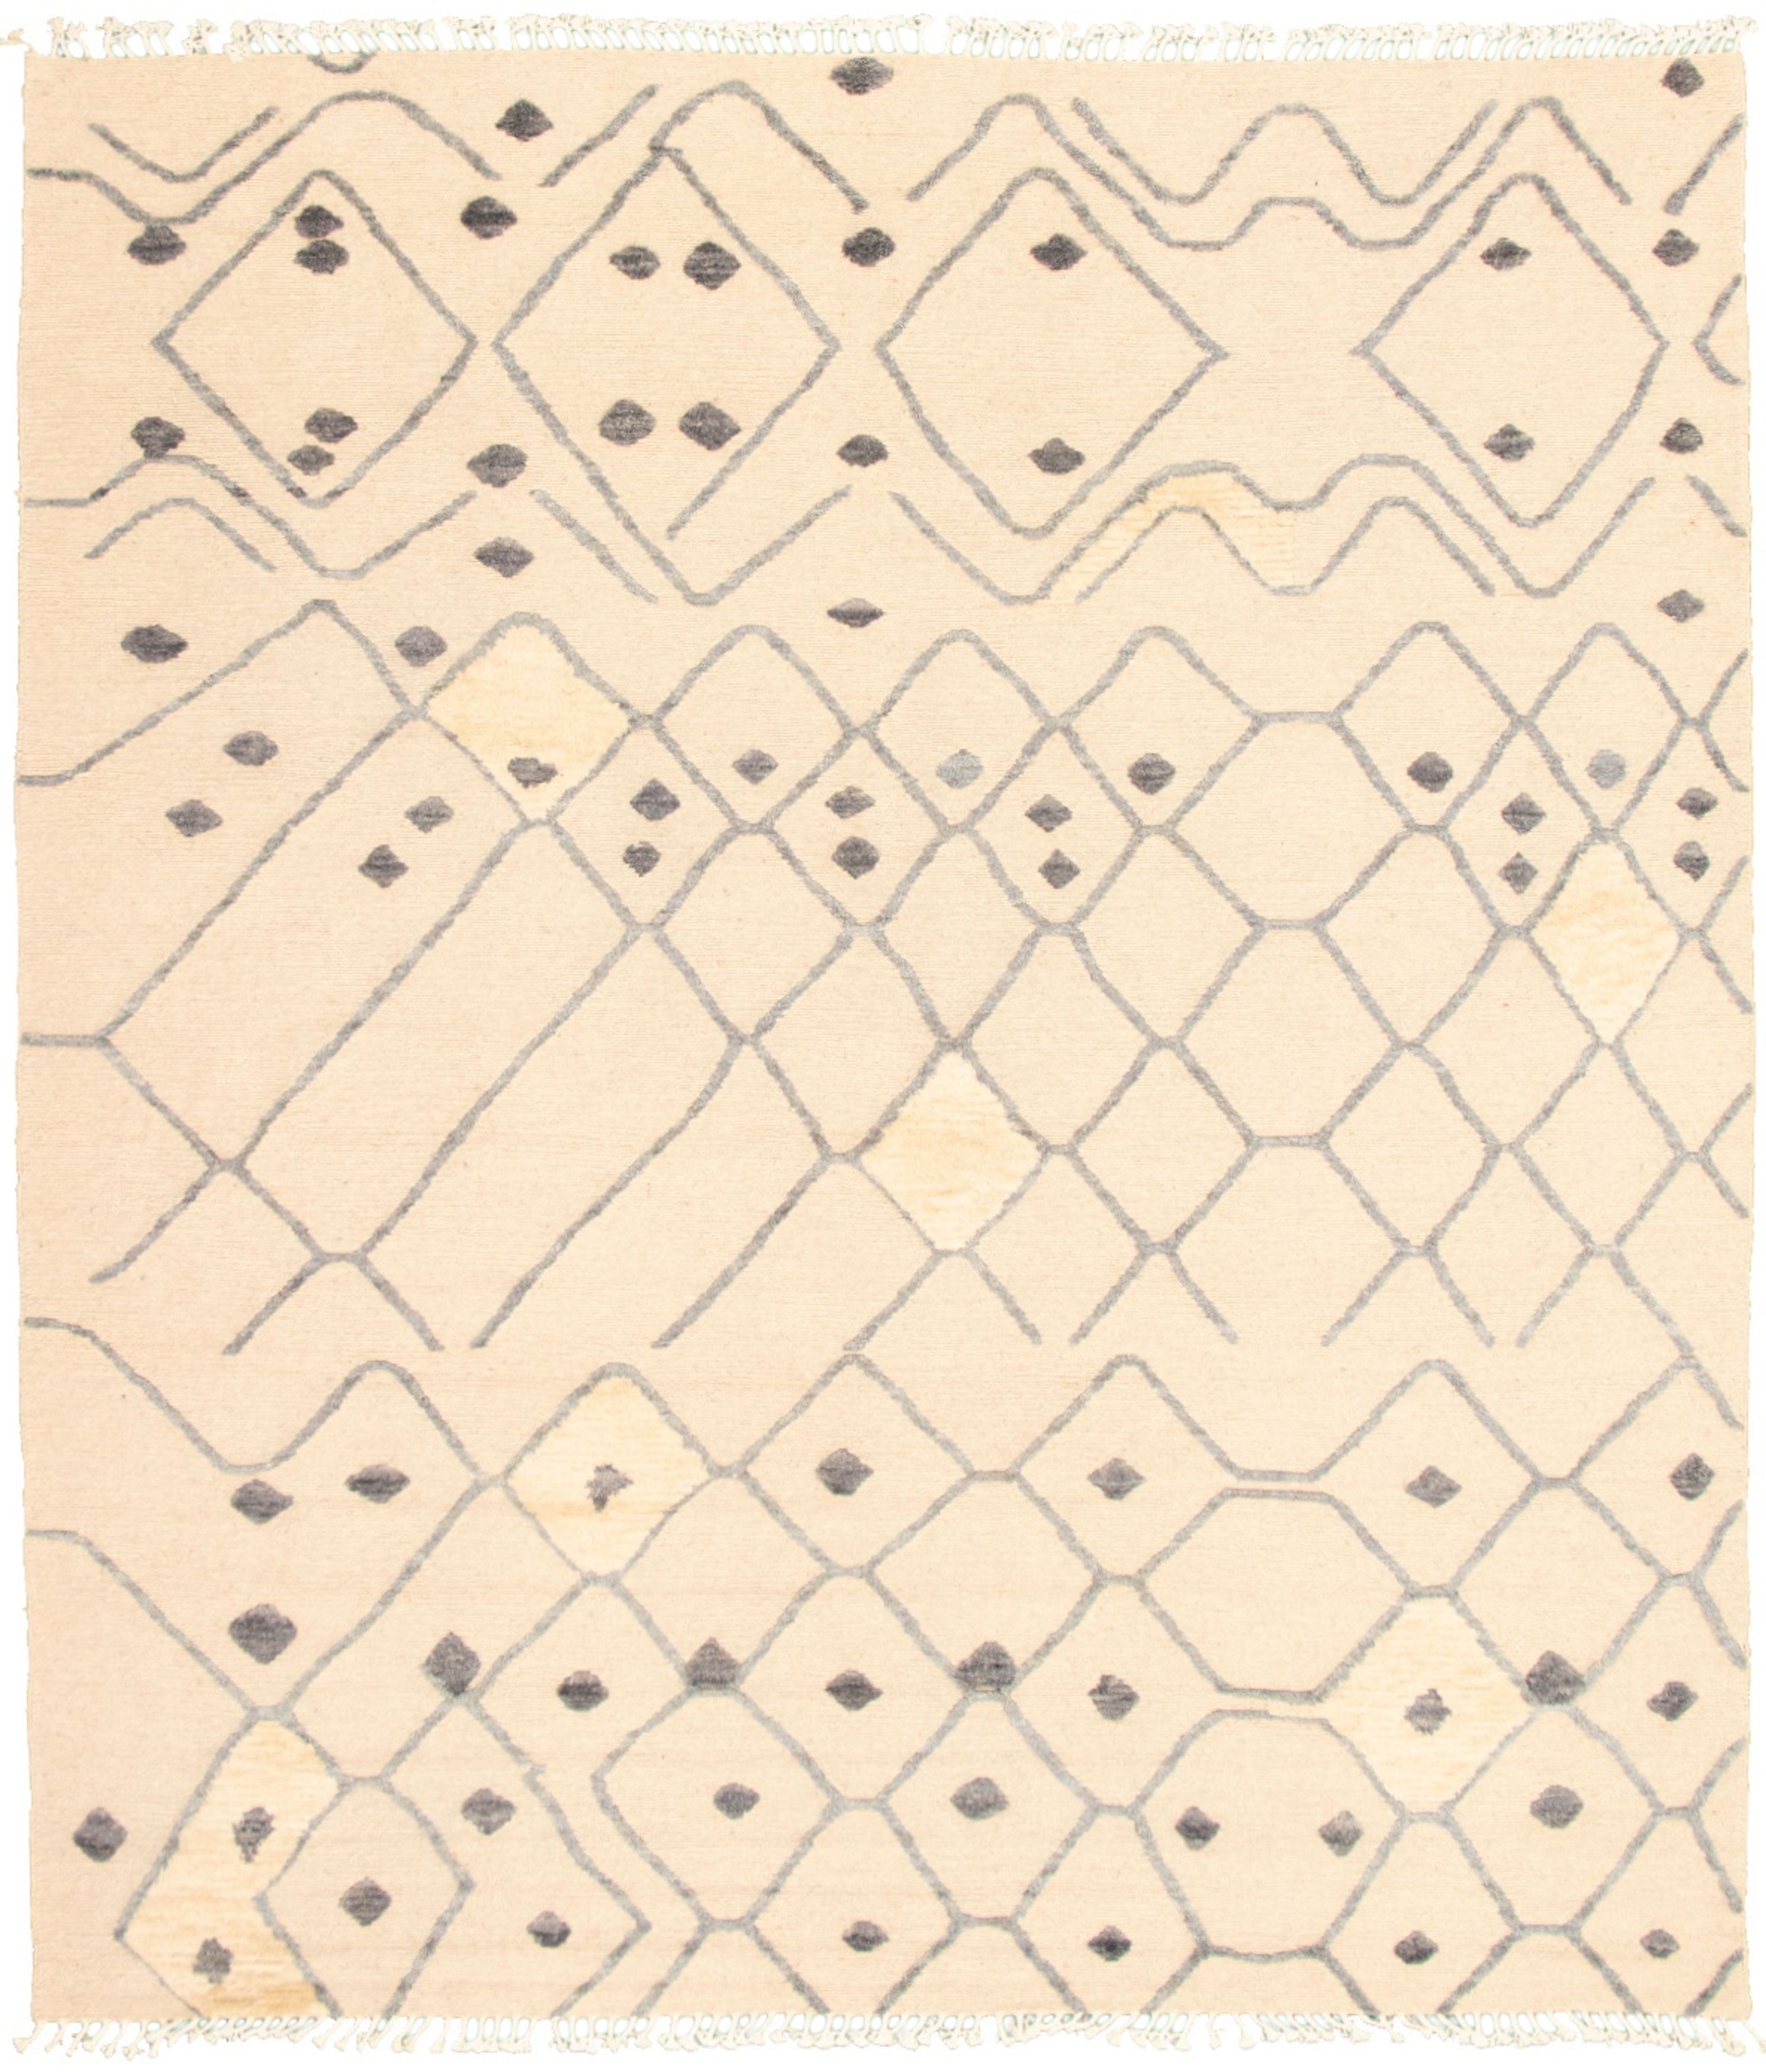 Hand-knotted Marrakech Ivory  Rug 8'4" x 9'6" Size: 8'4" x 9'6"  